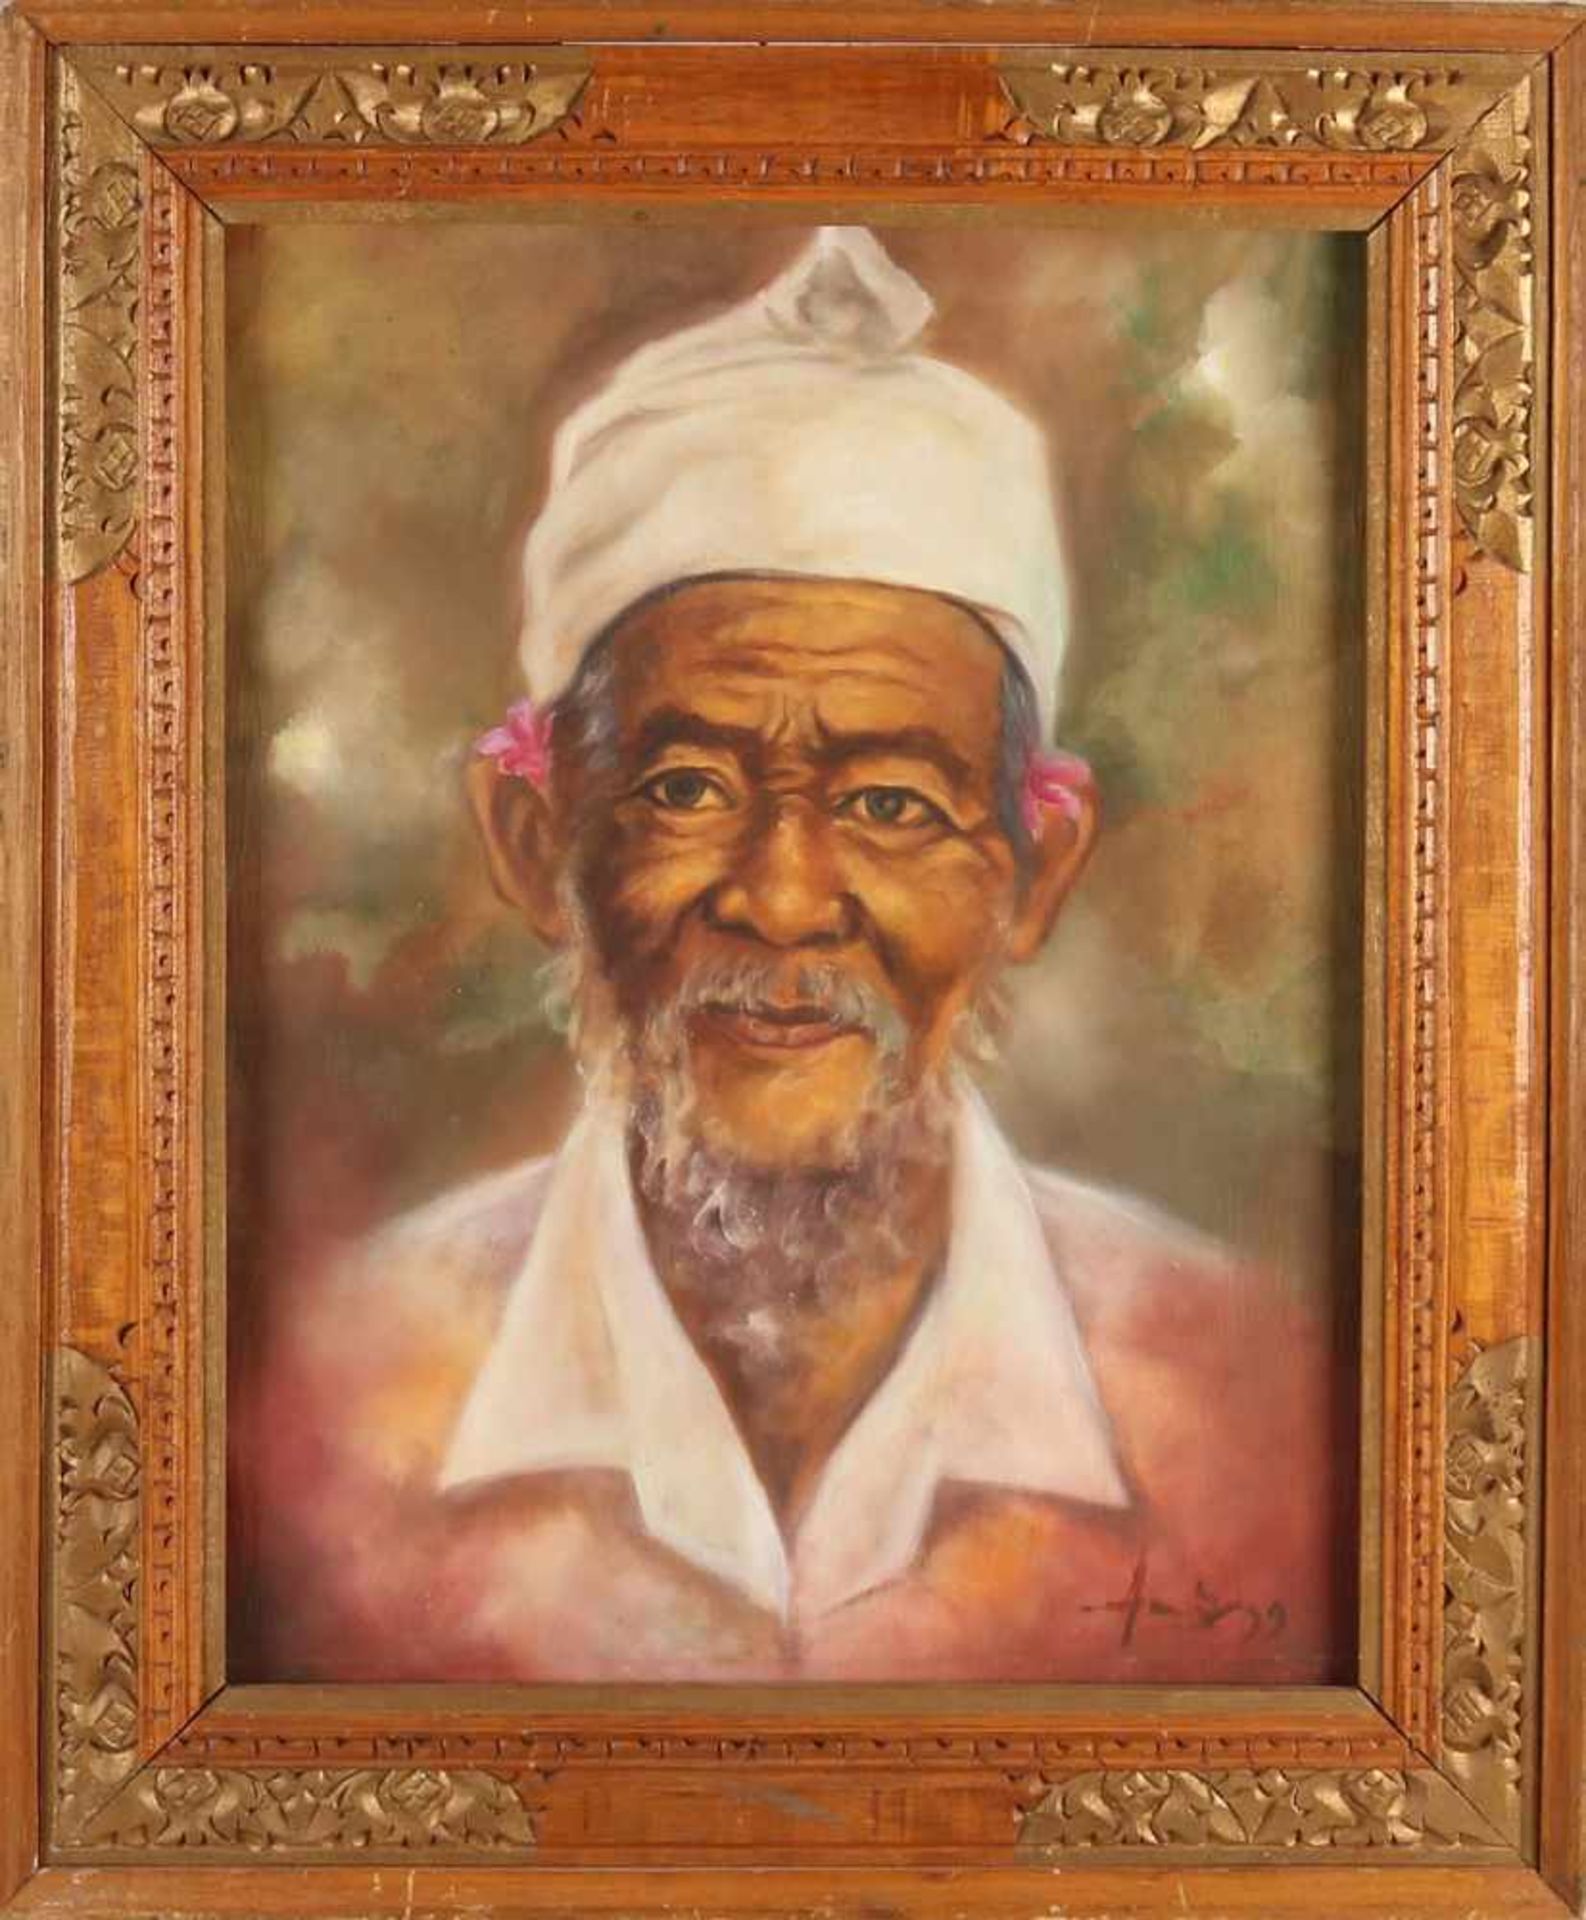 Unclear signed. Indonesian School. Portrait Indonesian man. Oil on linen. Size: 60 x H, B 50 cm.